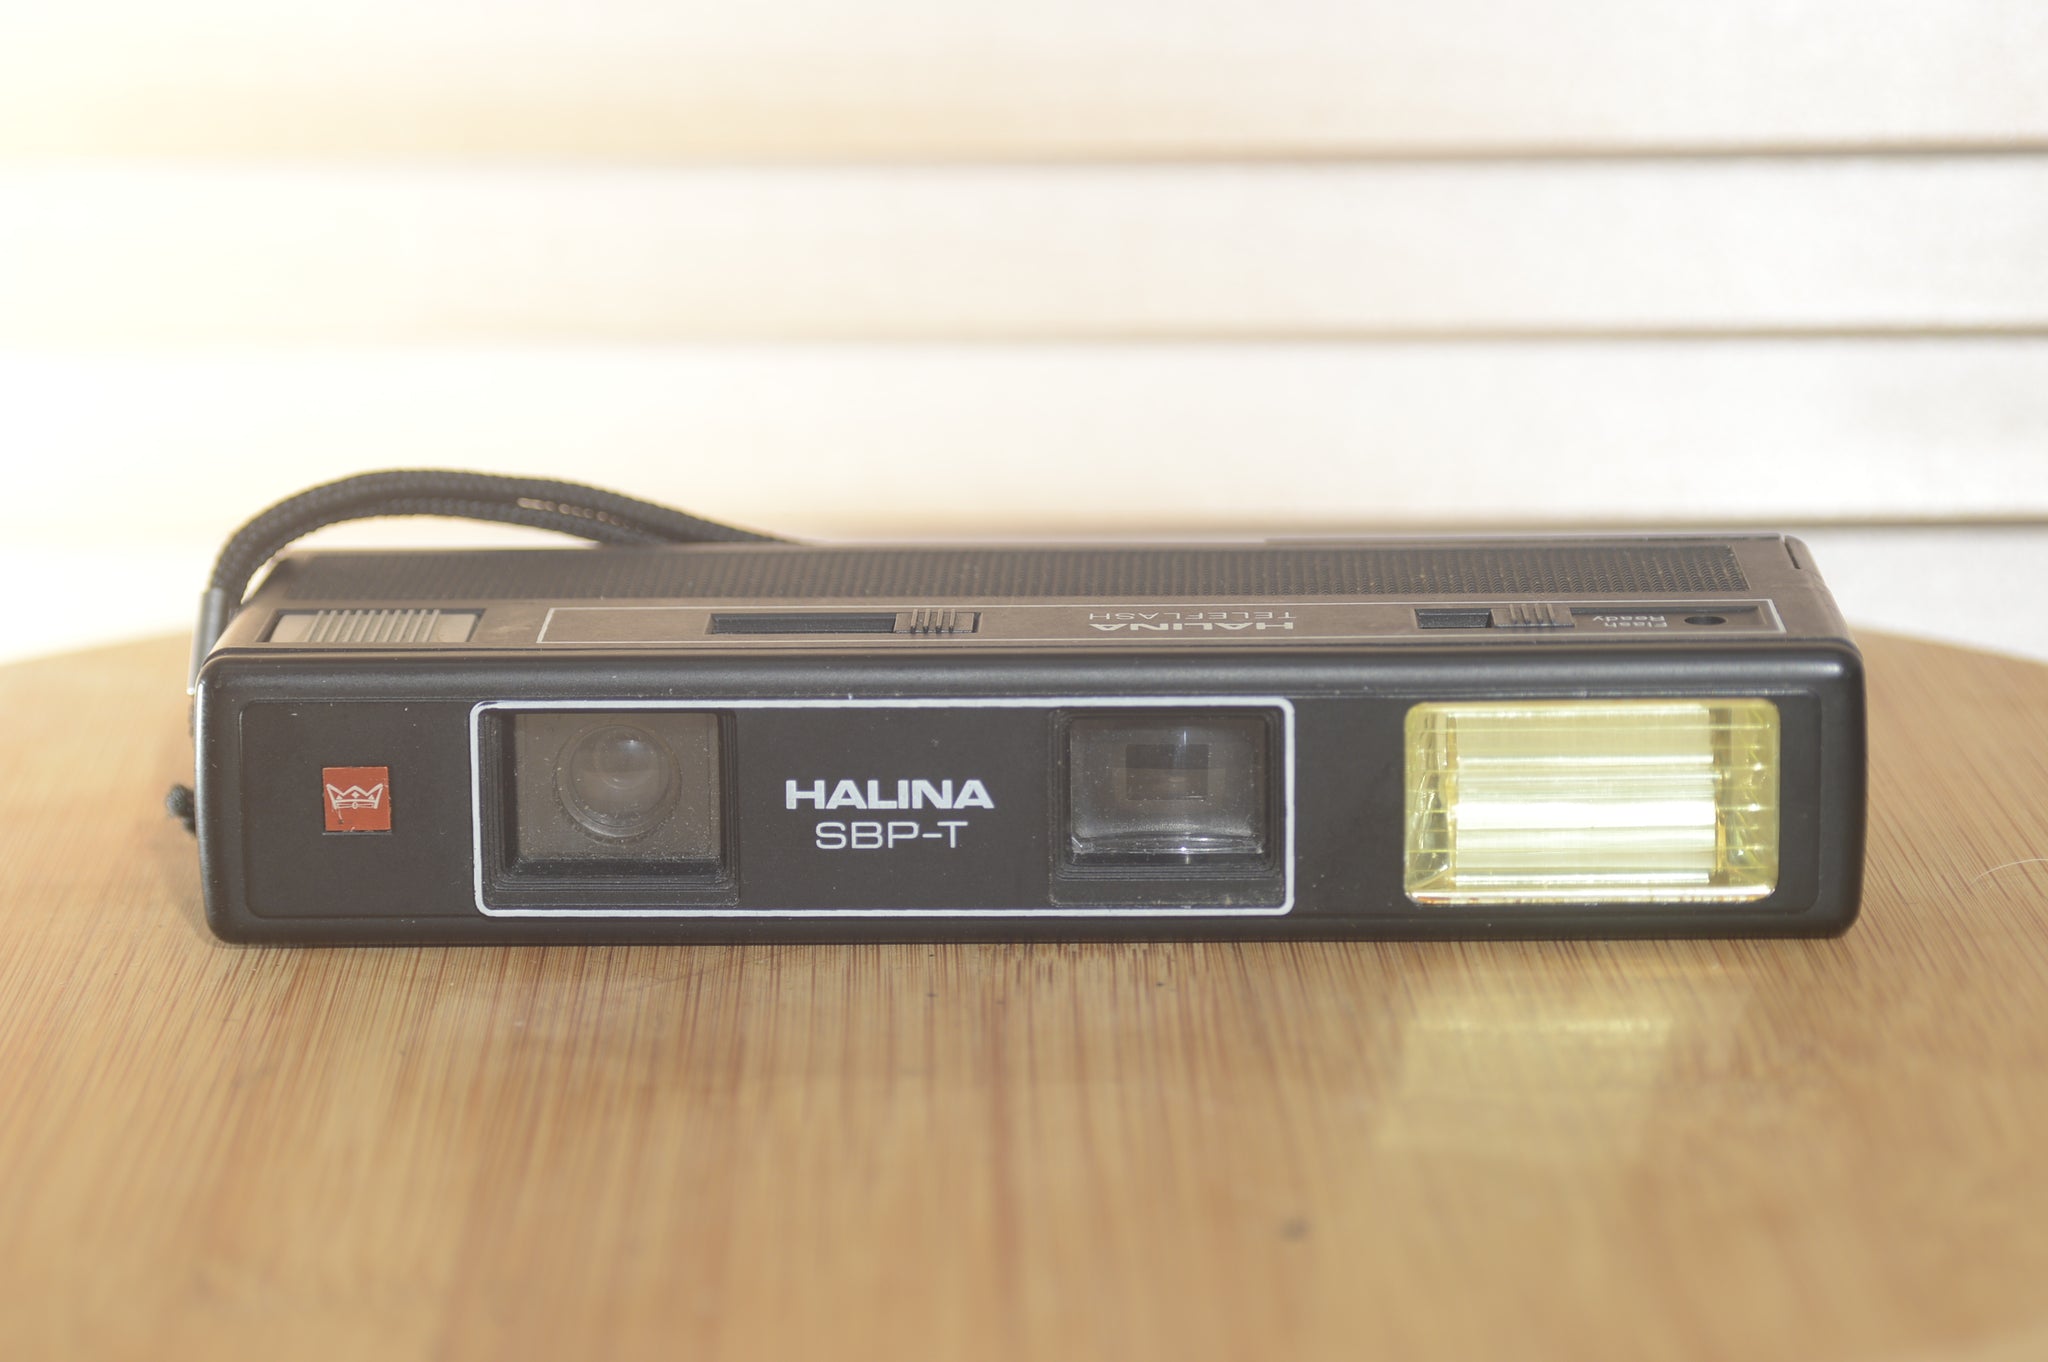 Halina SBP-T Teleflash 110mm Camera . Built in flash for low light conditions. - RewindCameras quality vintage cameras, fully tested and serviced